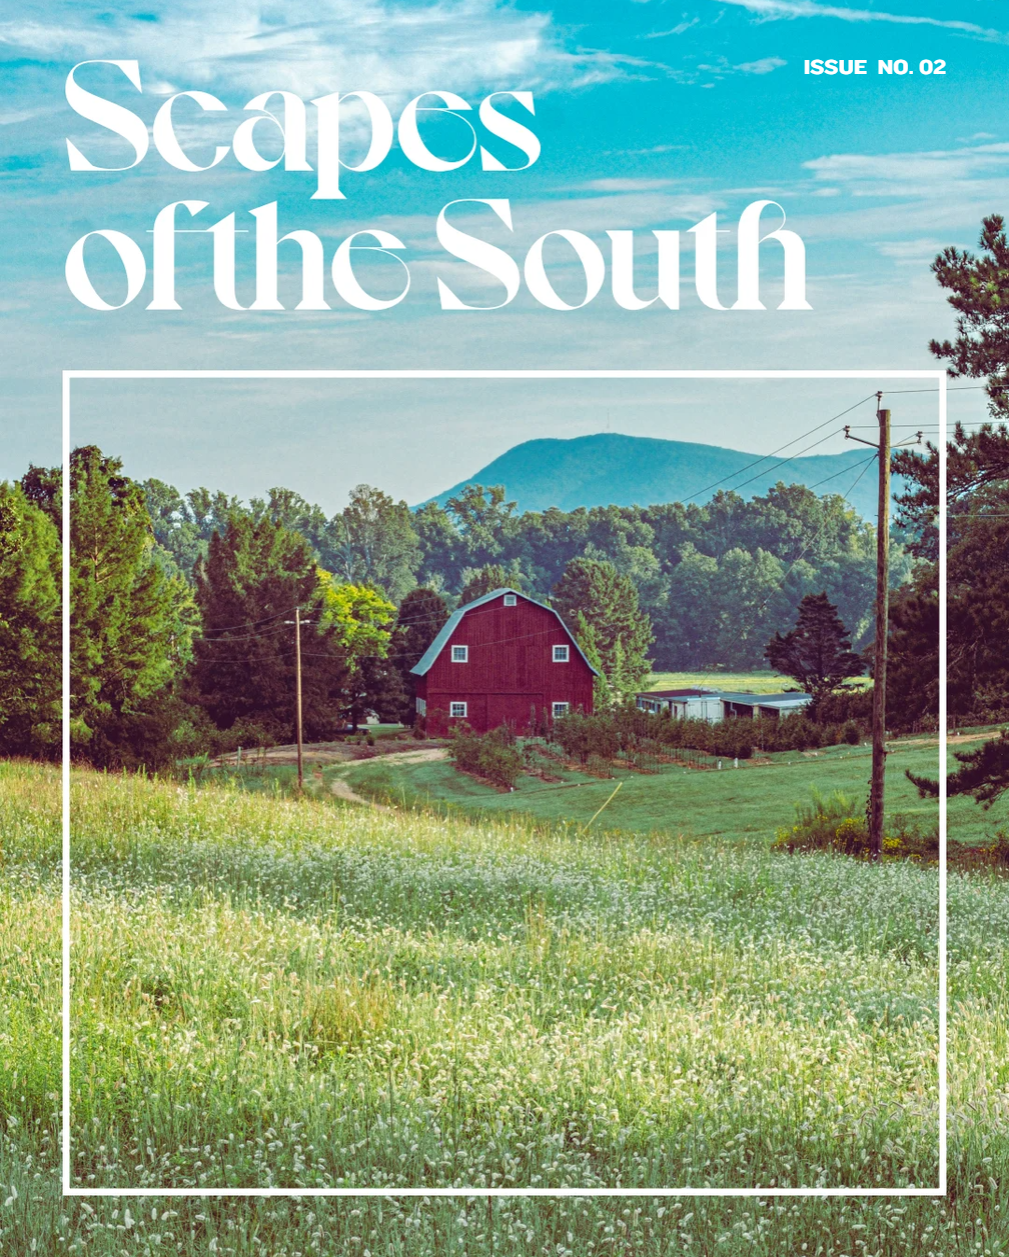 Scapes of the South - Issue 02